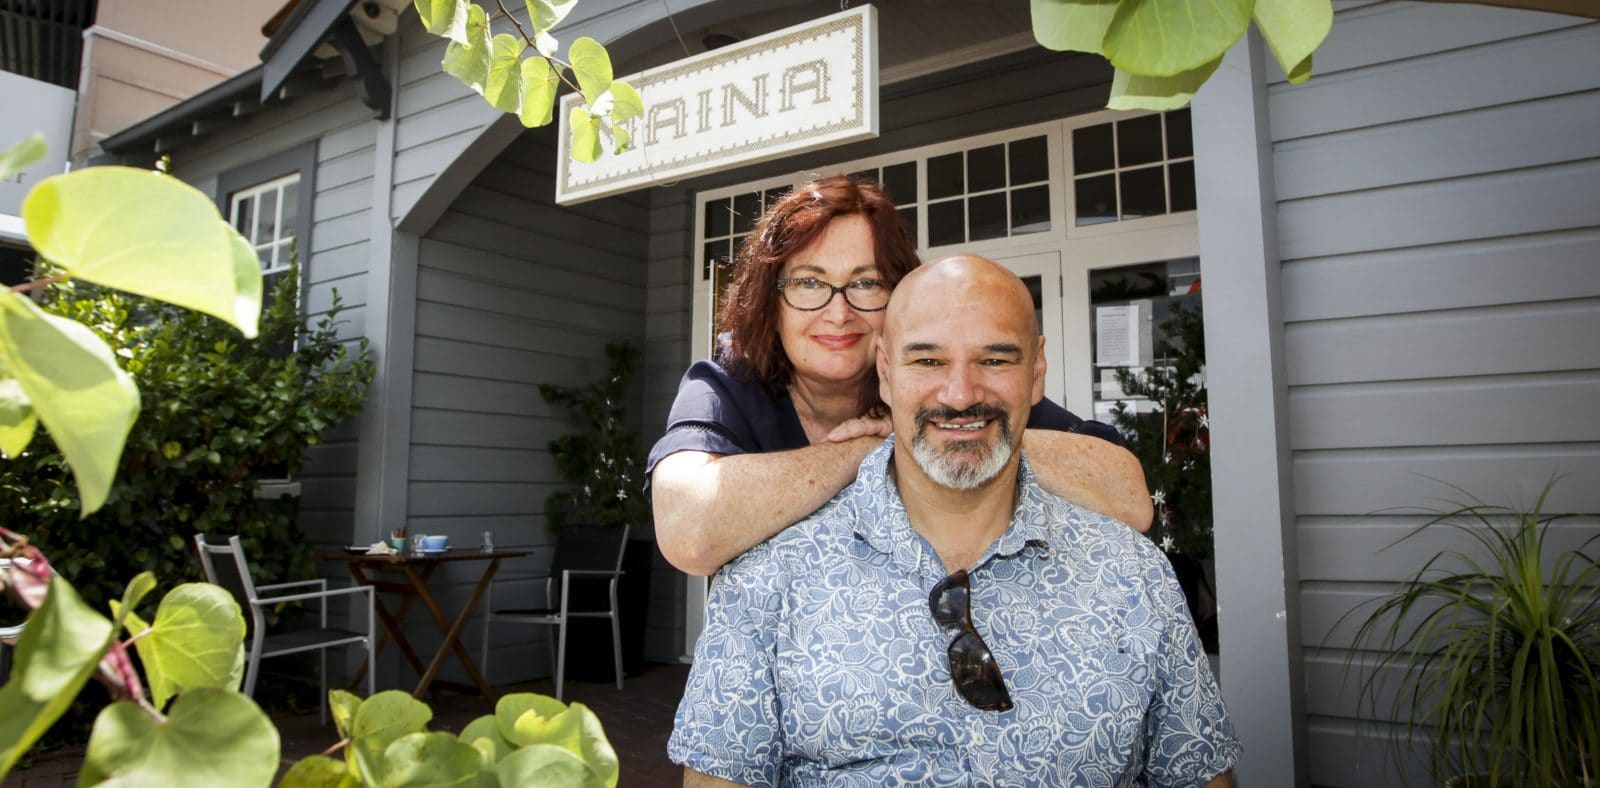 Maina café in Havelock North, owners Stu Best, and Katie Green, Regional Town Café at the 2018 Meadow Fresh New Zealand Café of the Year awards  Lower North Island Region. Havelock North.  24th December 2017 Photographer Paul Taylor Hawke's Bay Today